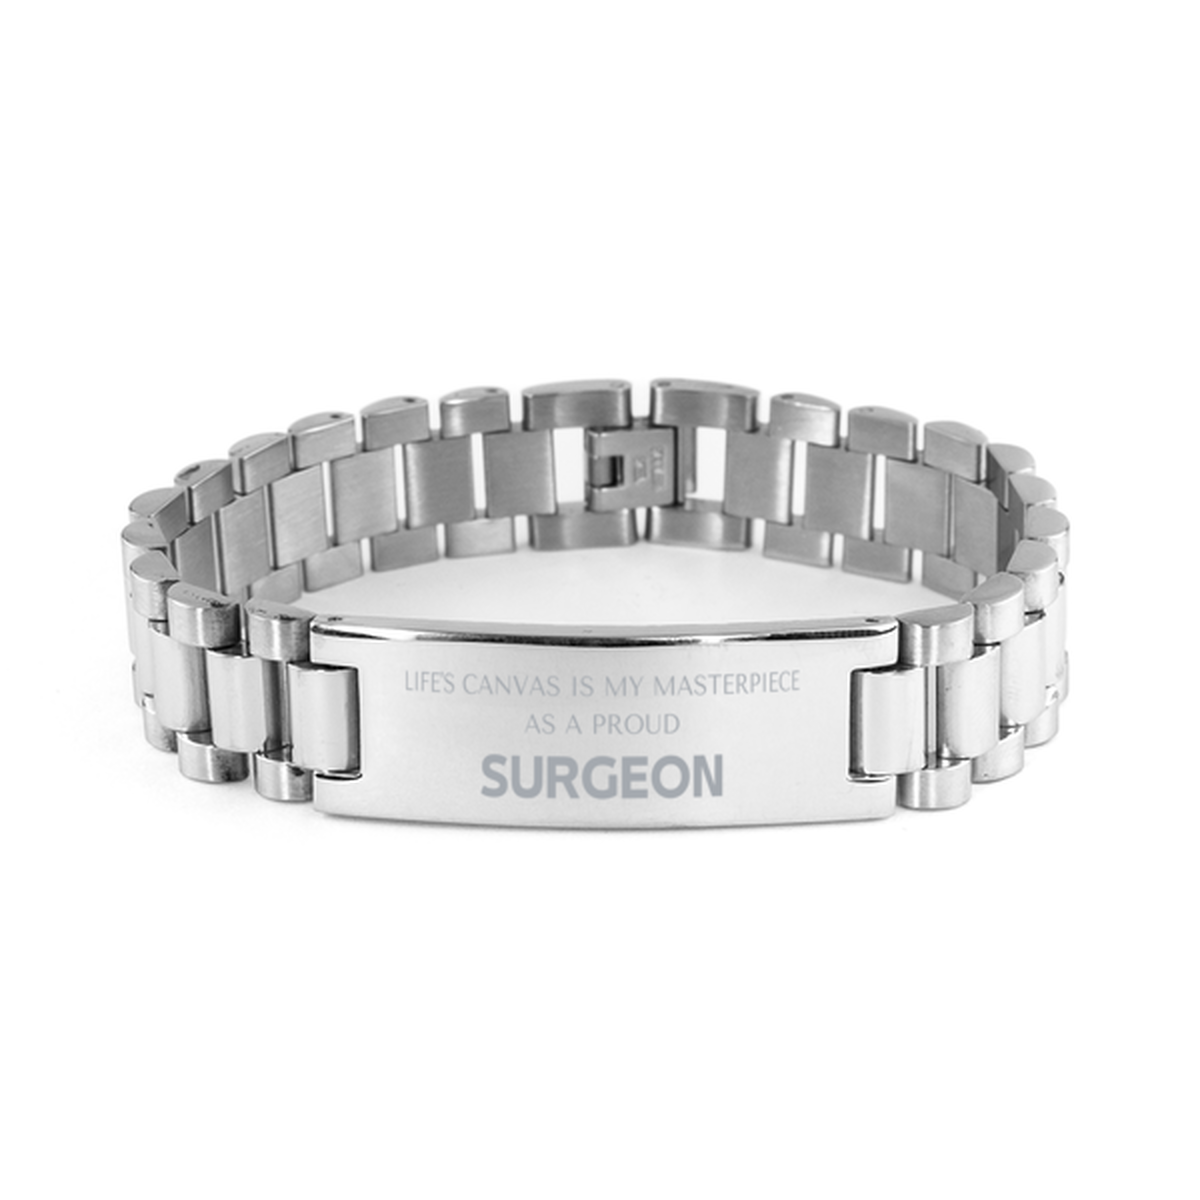 Proud Surgeon Gifts, Life's canvas is my masterpiece, Epic Birthday Christmas Unique Ladder Stainless Steel Bracelet For Surgeon, Coworkers, Men, Women, Friends